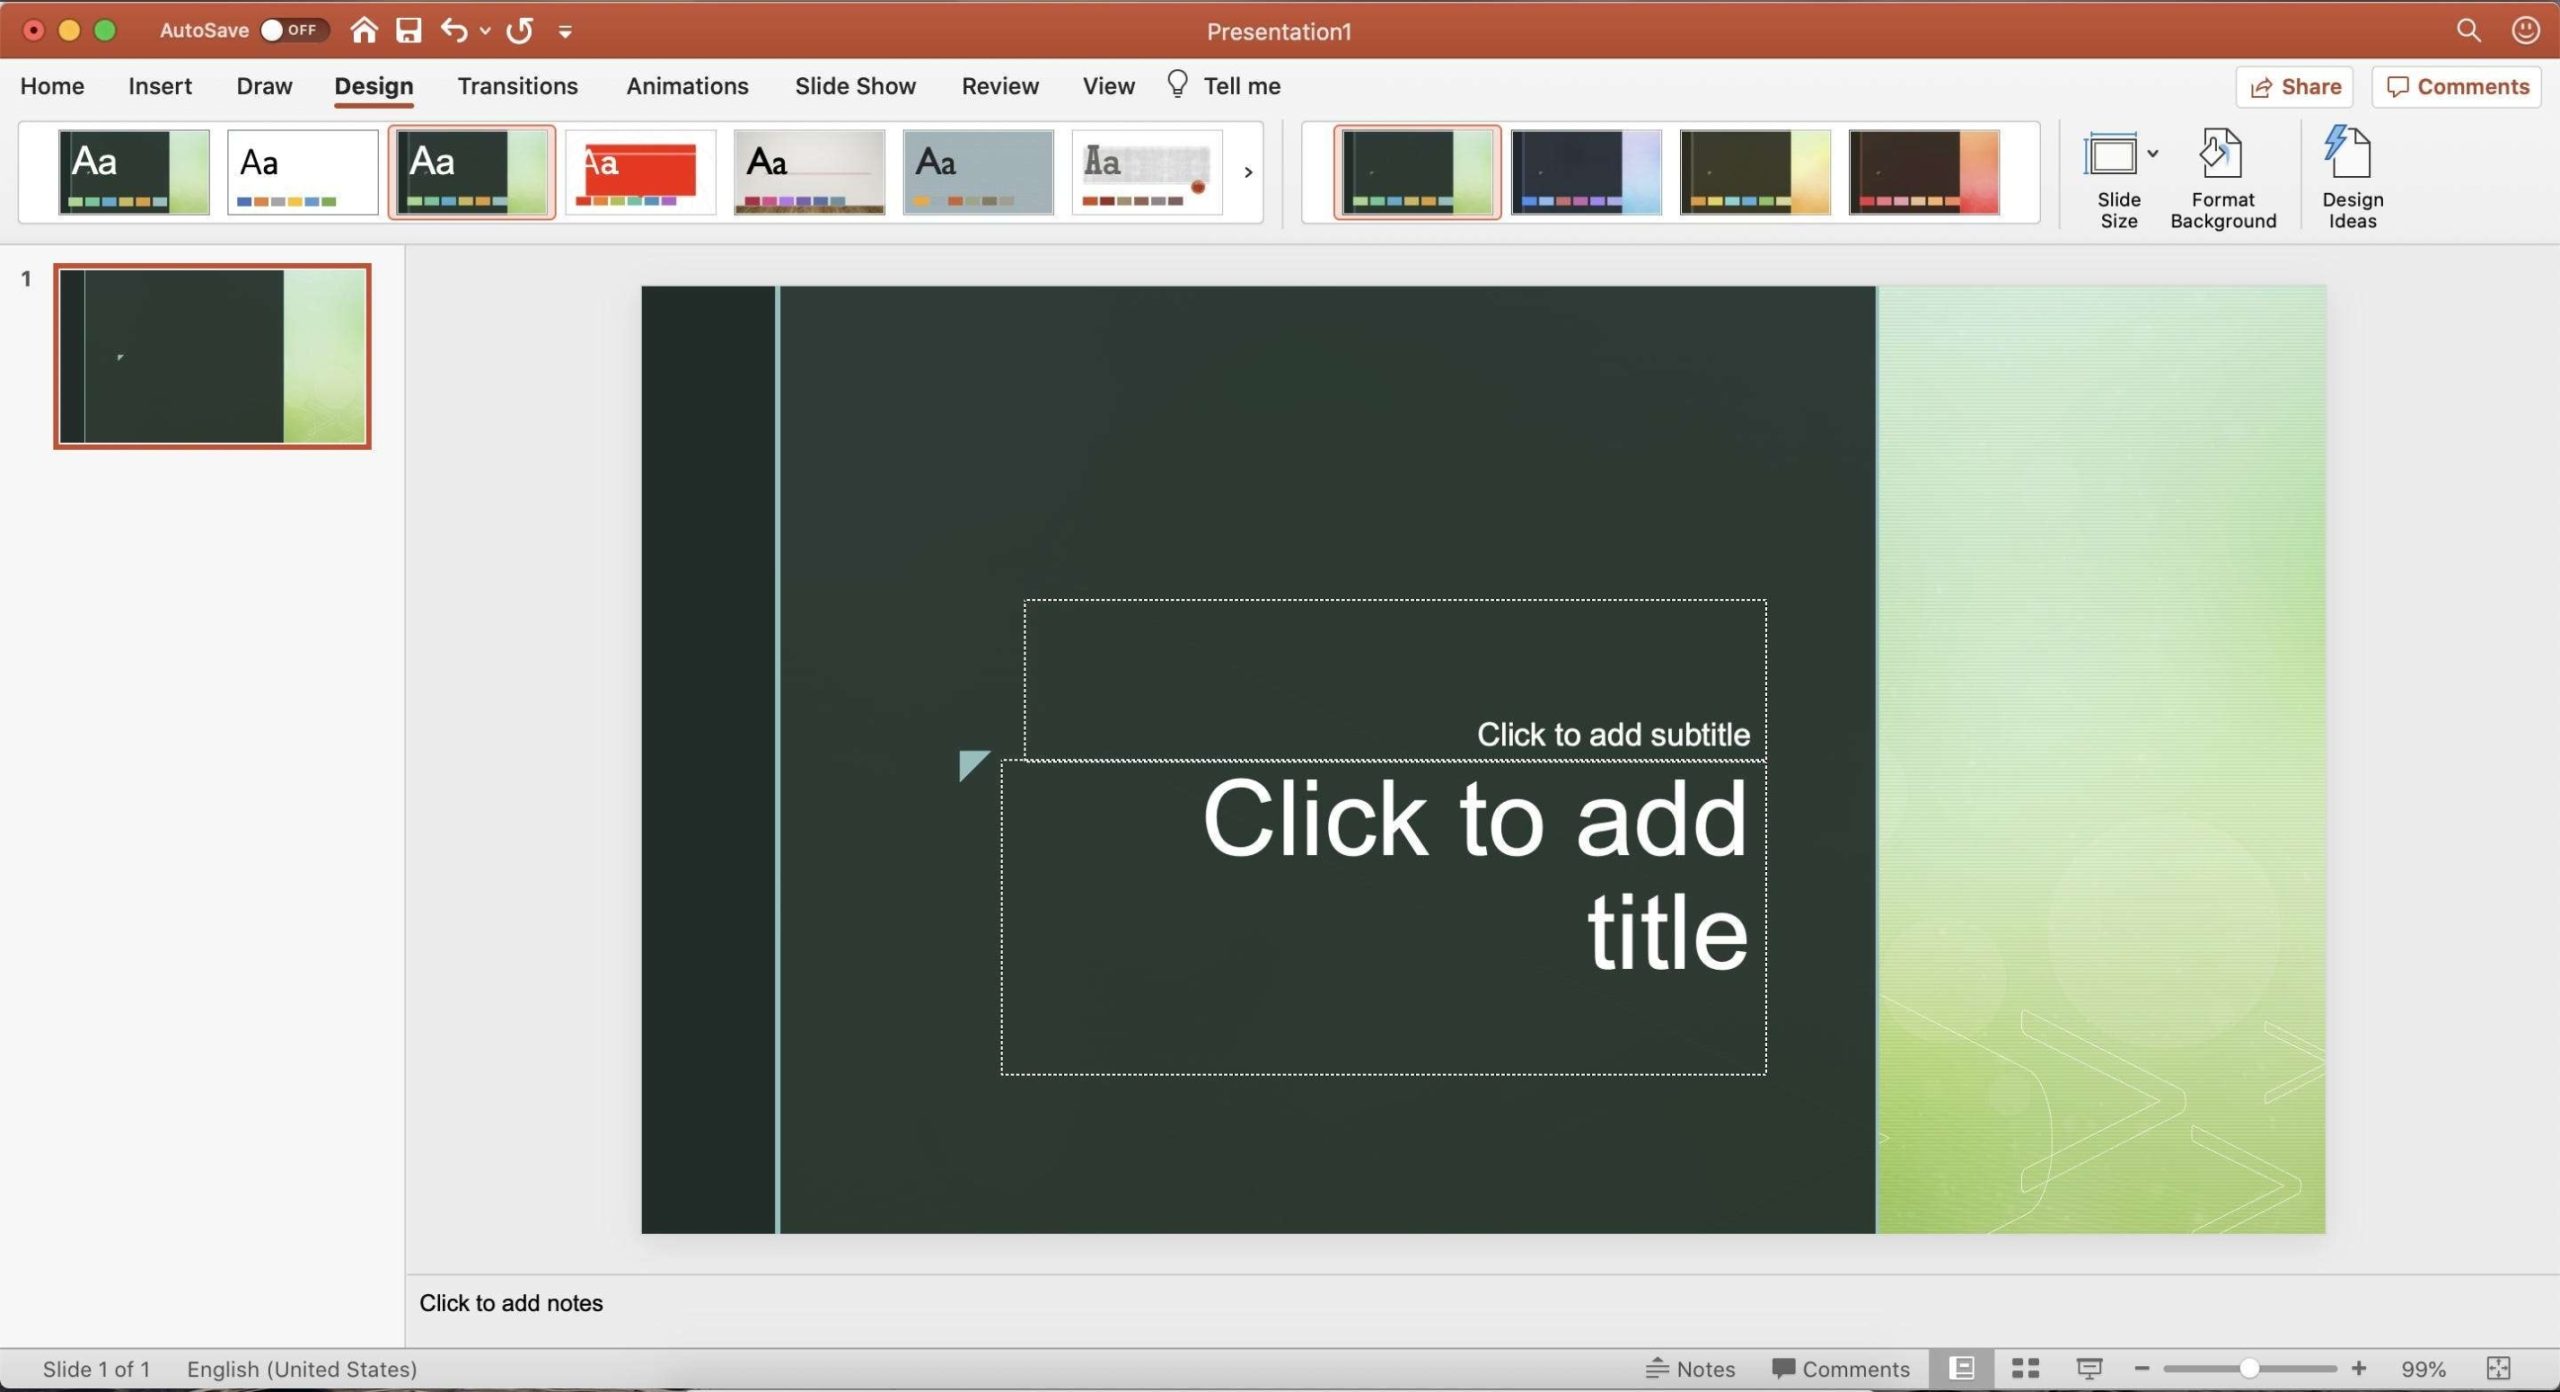 How To Edit A Microsoft Powerpoint Template To Change Its Default Color Theme, Font, And More Intended For How To Change Powerpoint Template